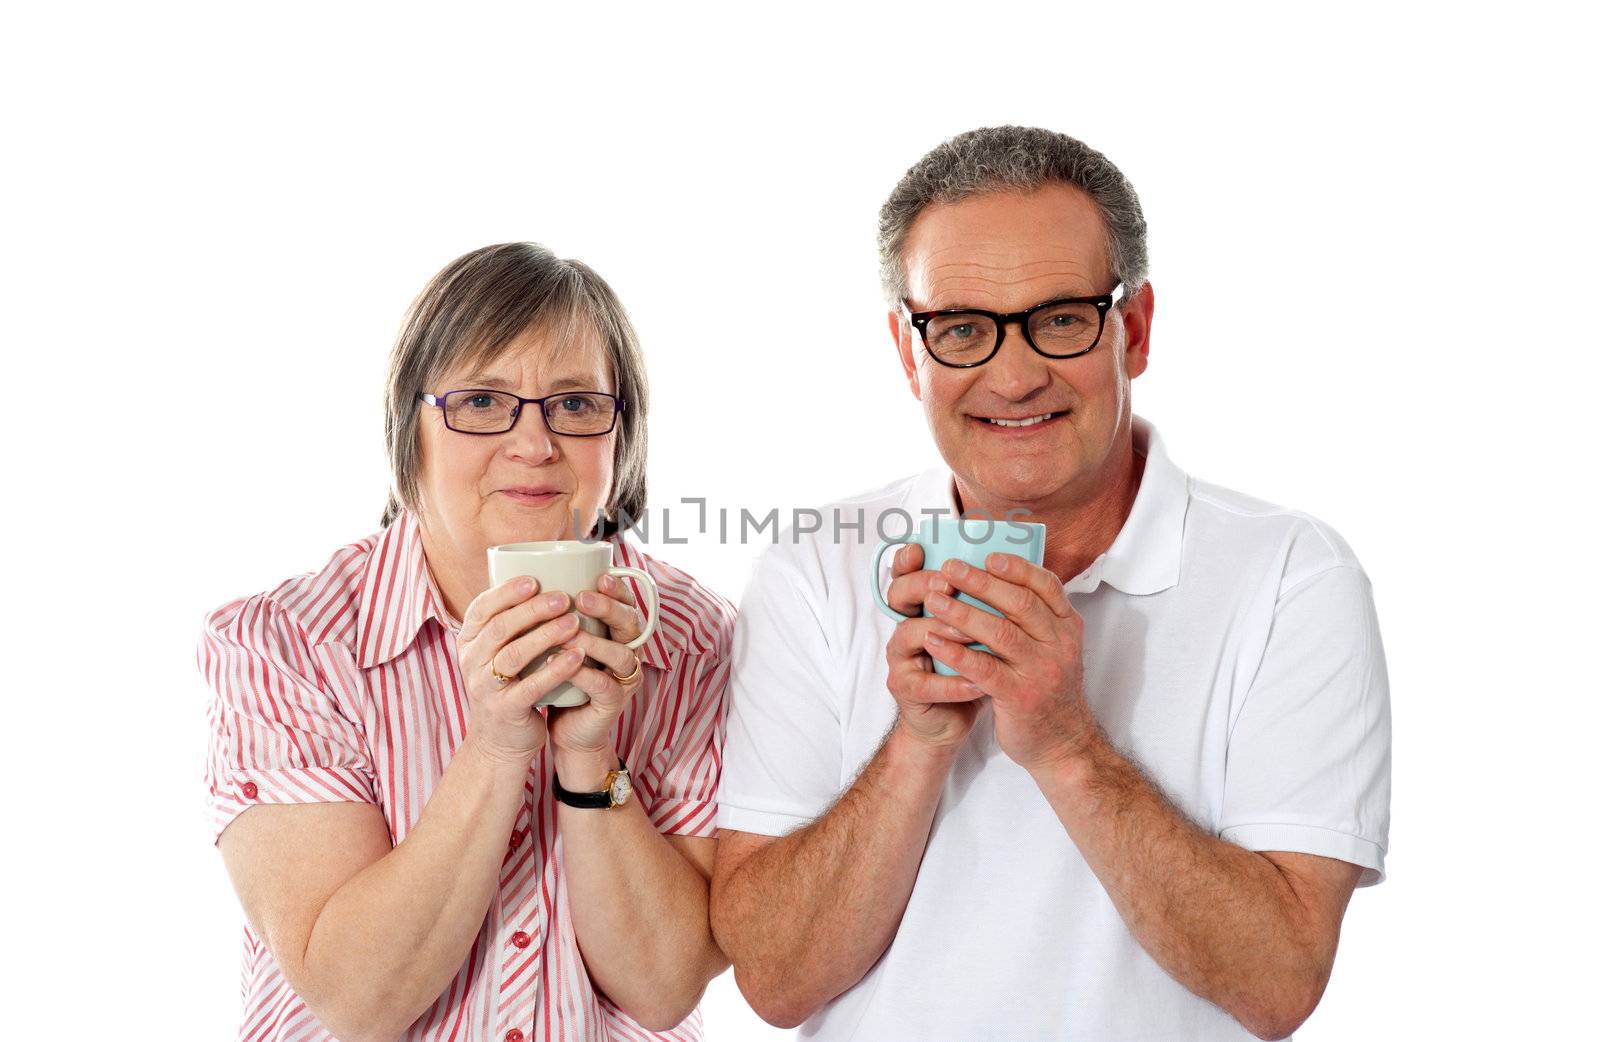 Romantic senior couple holding coffee mugs and smiling at camera